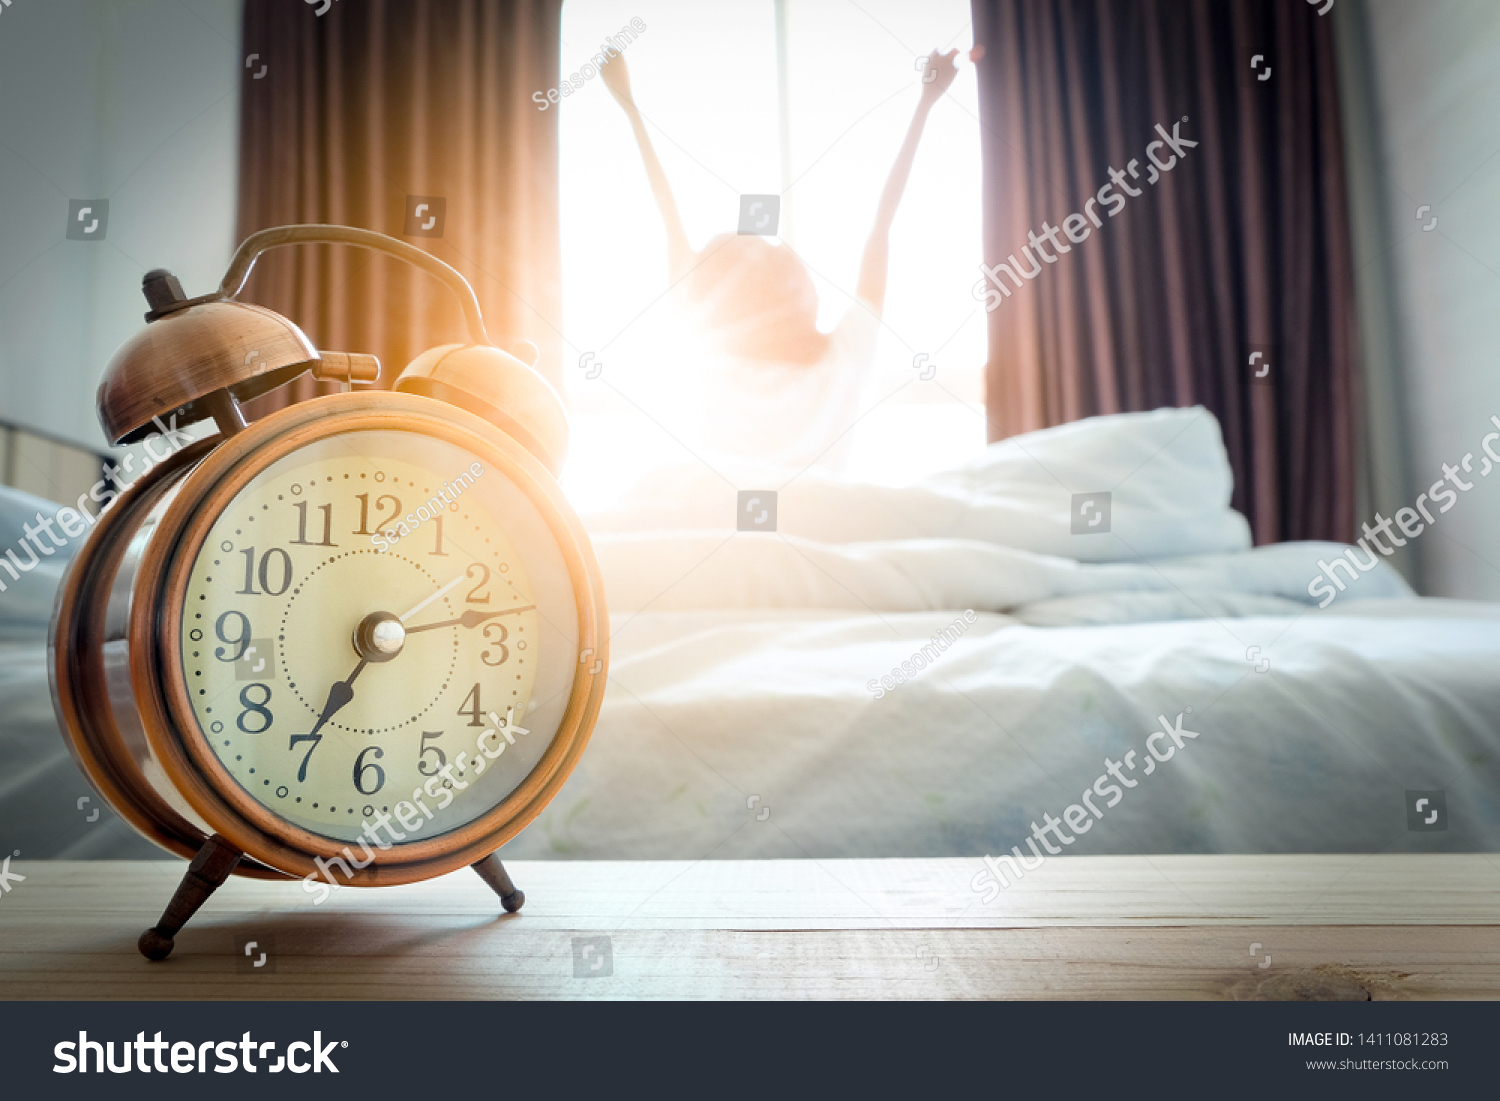 Morning of a new day, alarm clock wake up woman sitting in the room. A woman stretch the muscles at window. Health and care concepts #1411081283